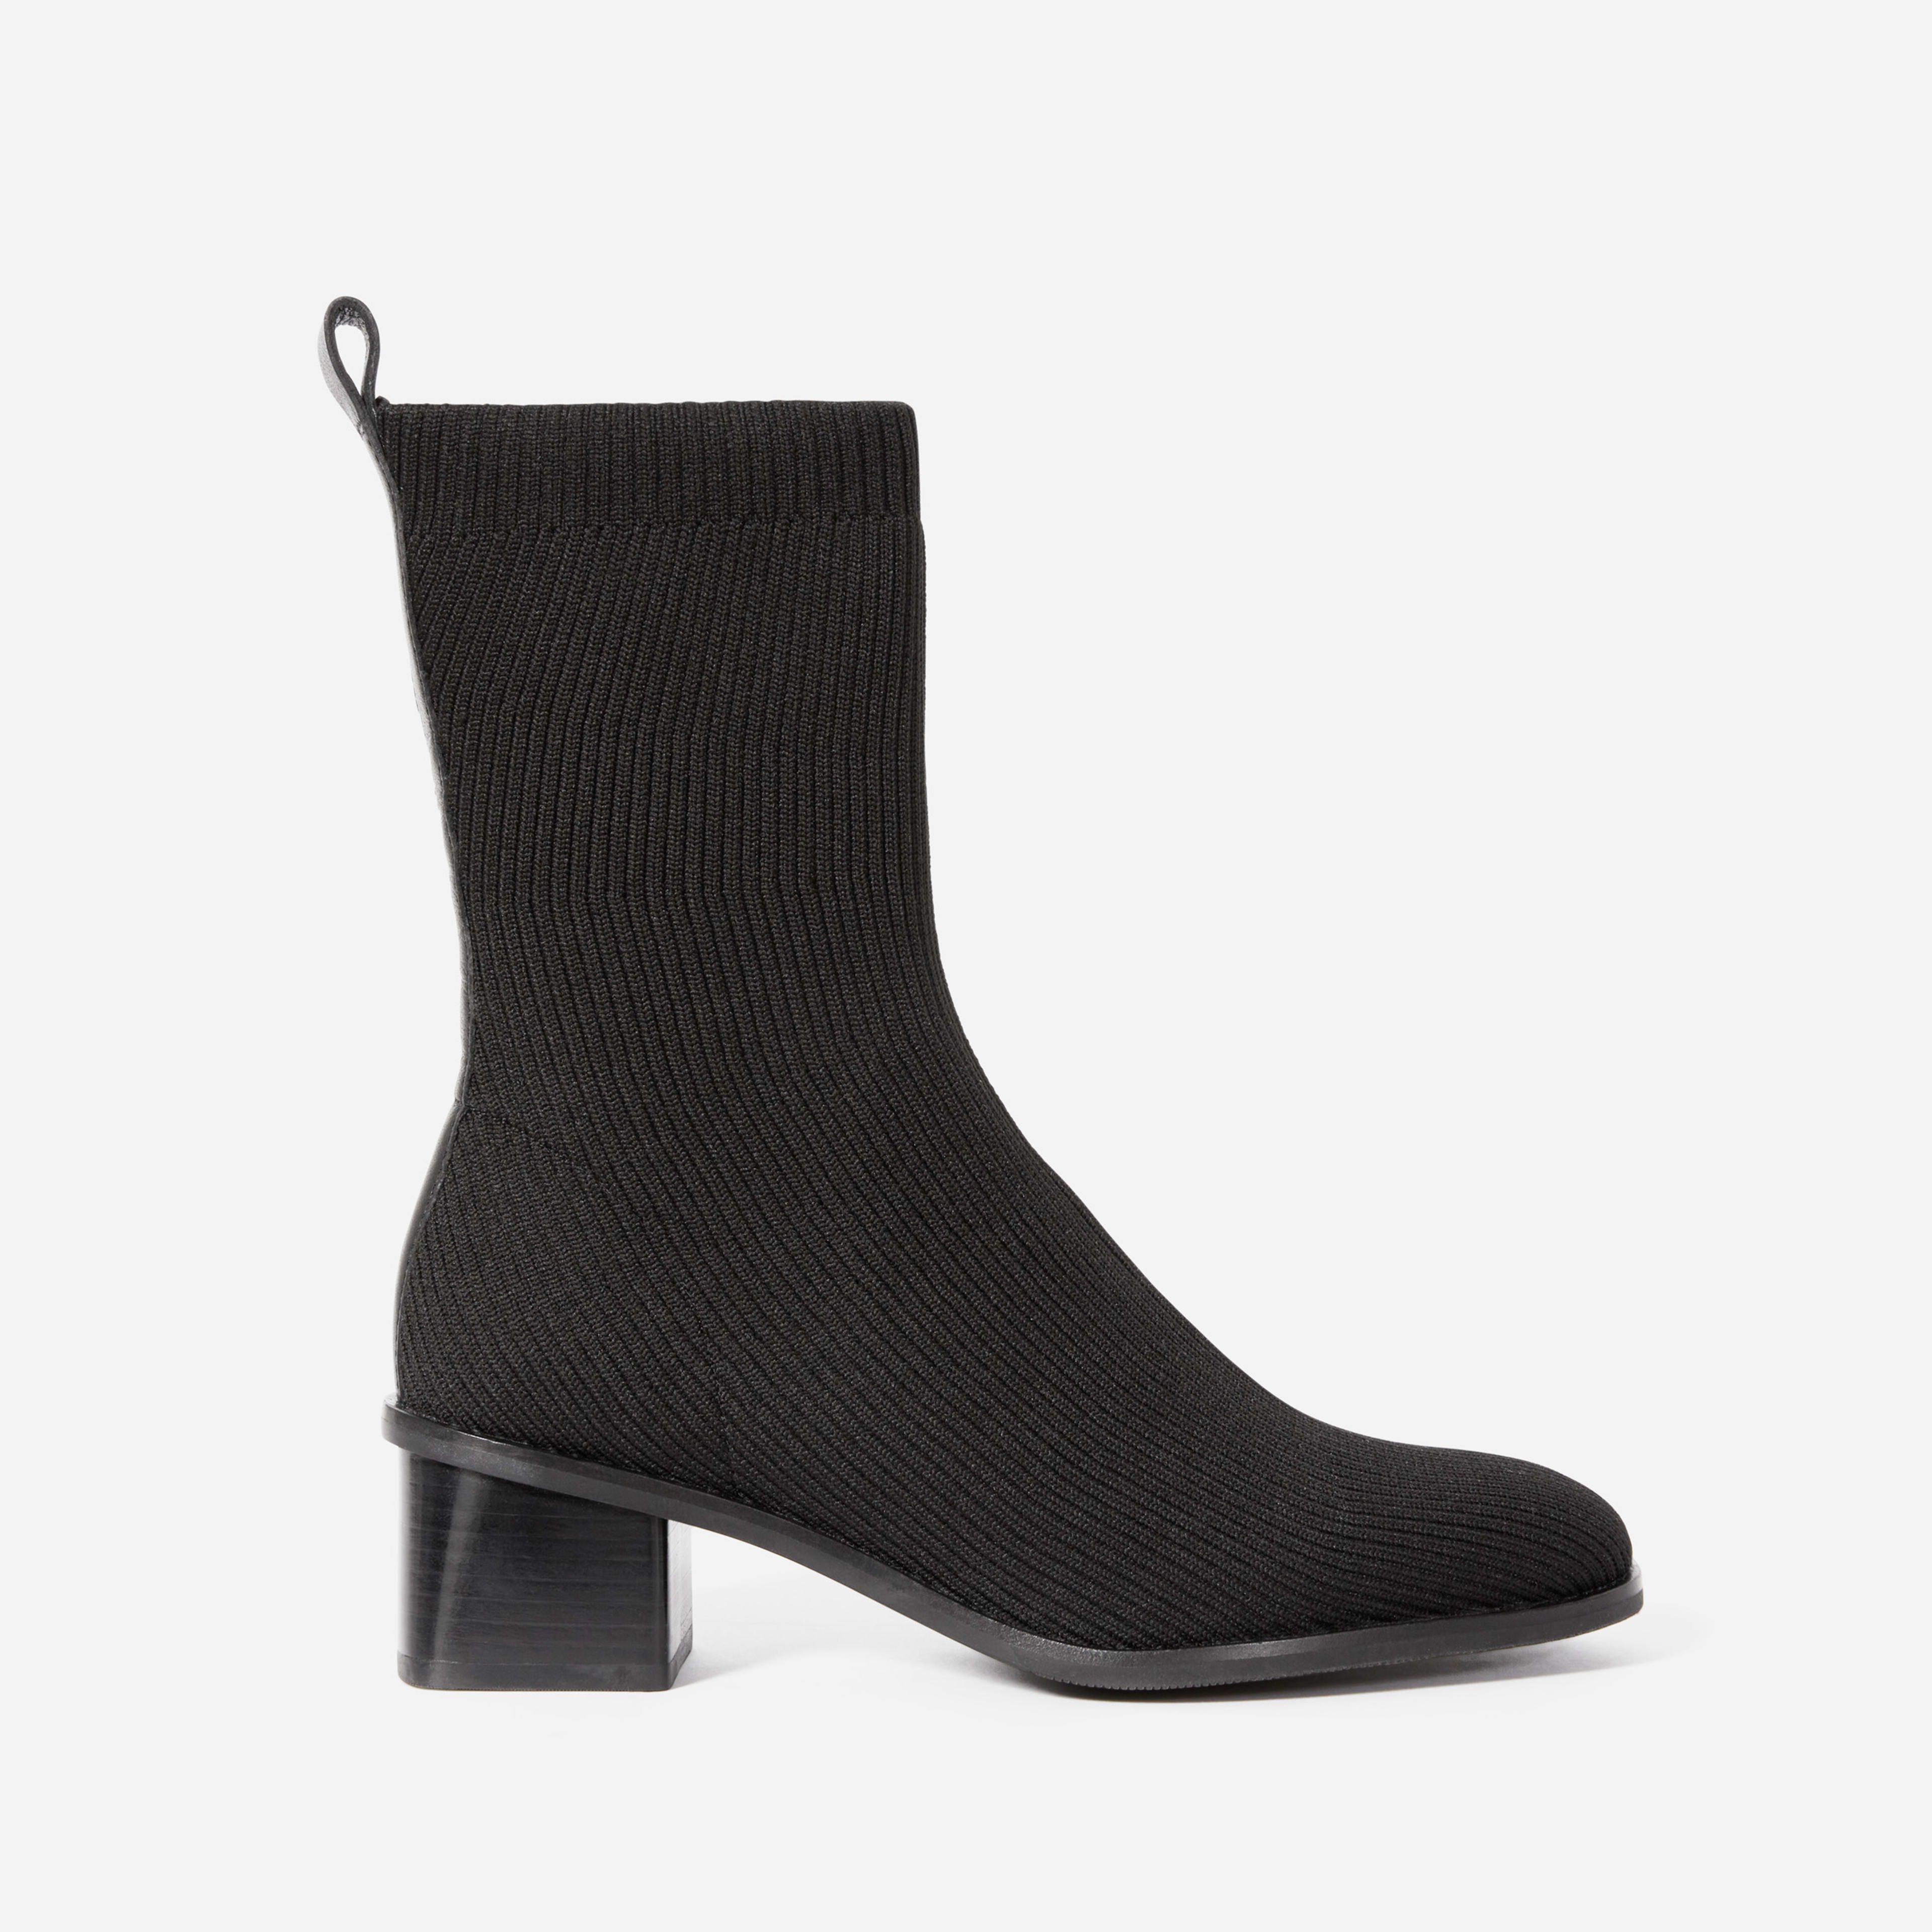 The High-Ankle Glove Boot in ReKnit® | Everlane